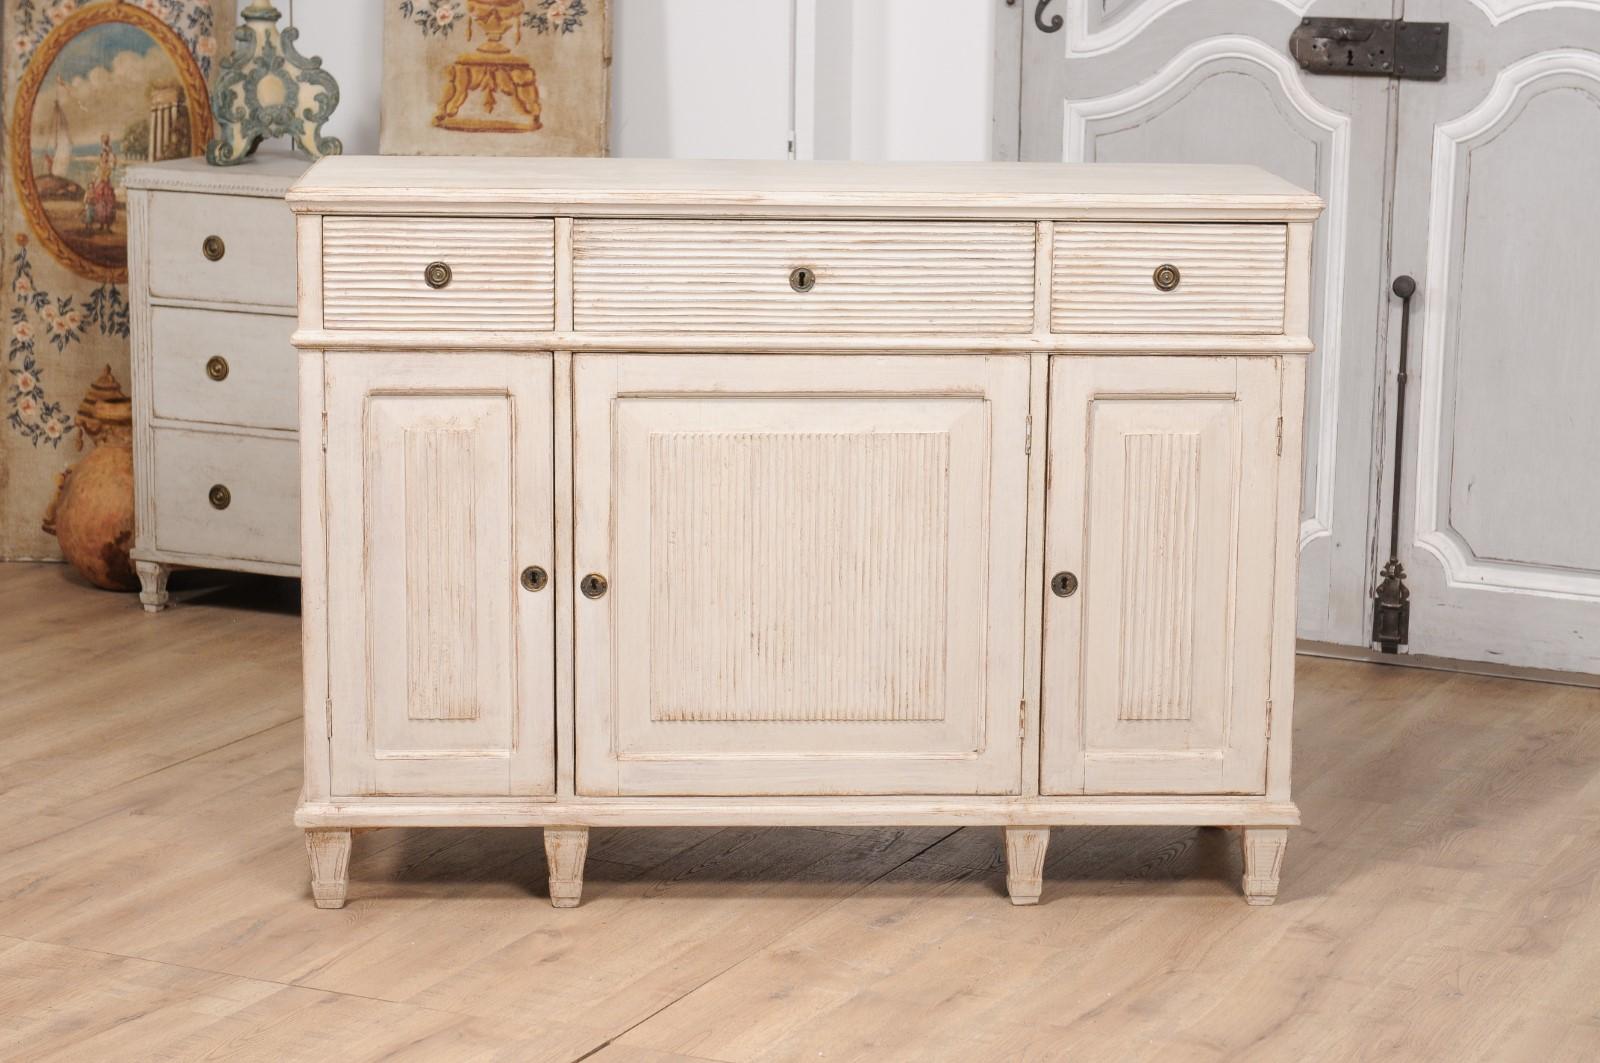 19th Century 1850s Swedish Painted Sideboard From Dalarna with Carved Reeded Motifs For Sale